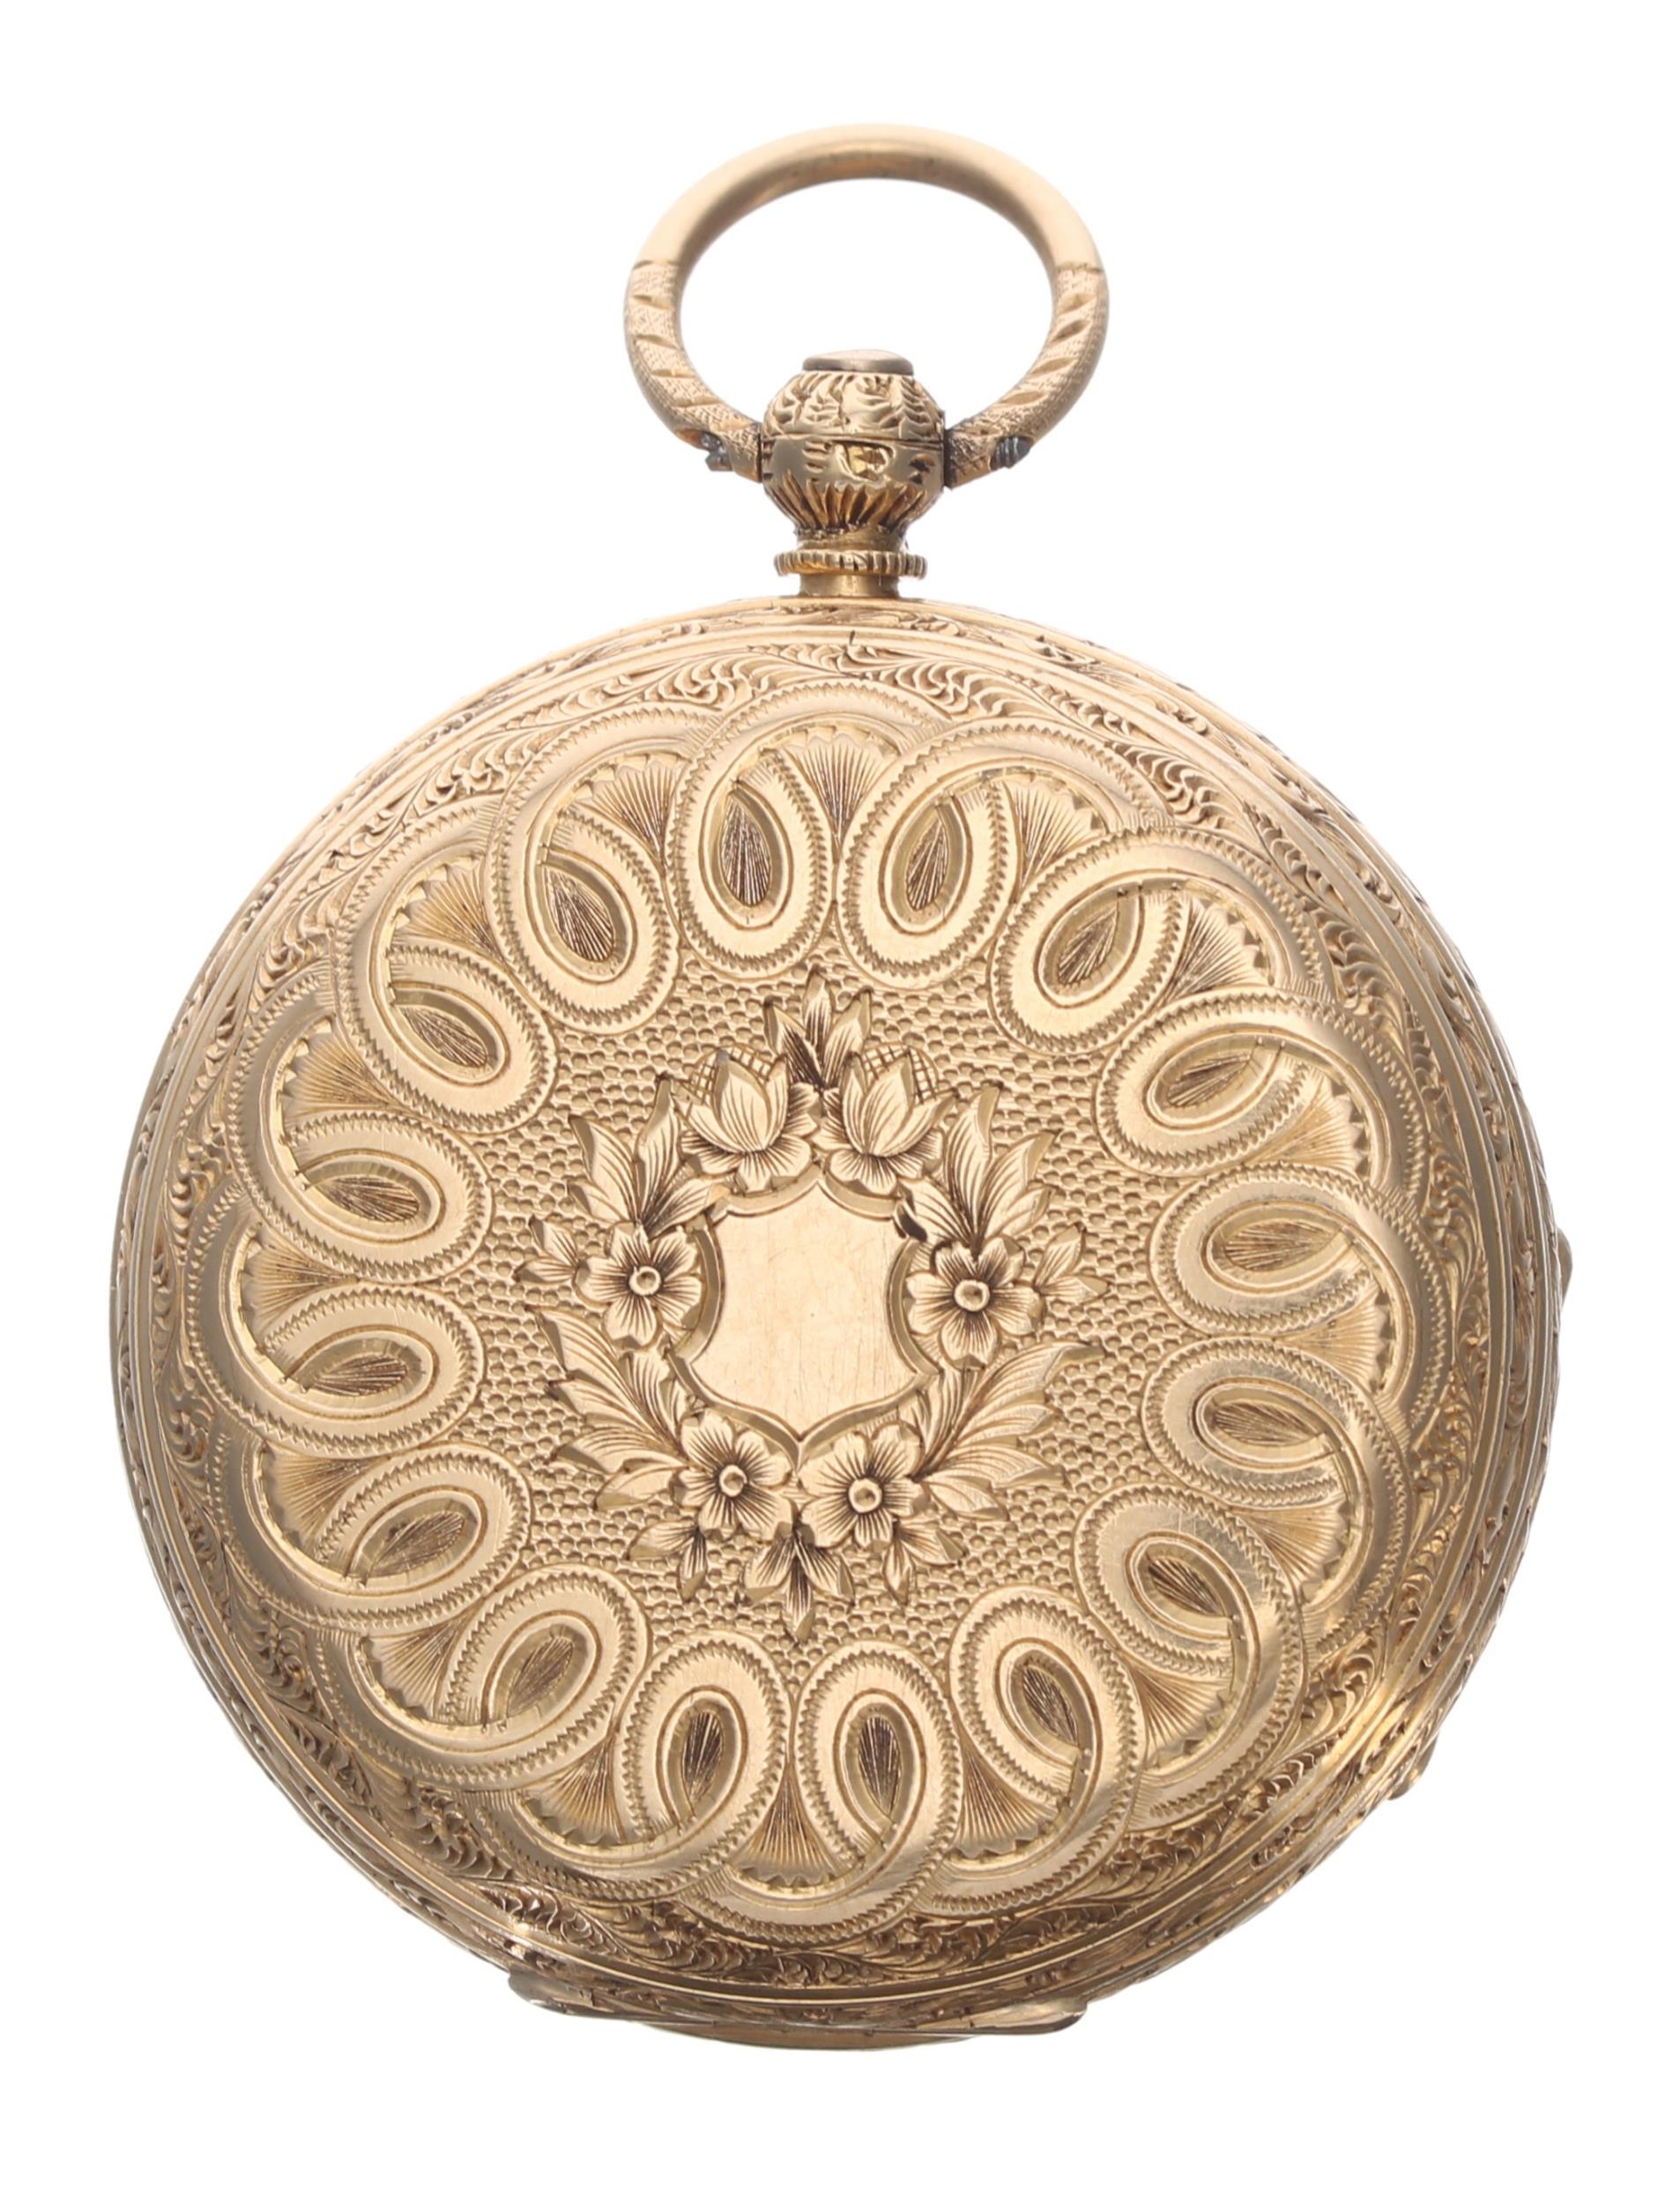 Small Victorian18ct fusee lever pocket watch, London 1865, the movement signed D. Ferris, Calne, no. - Image 3 of 4